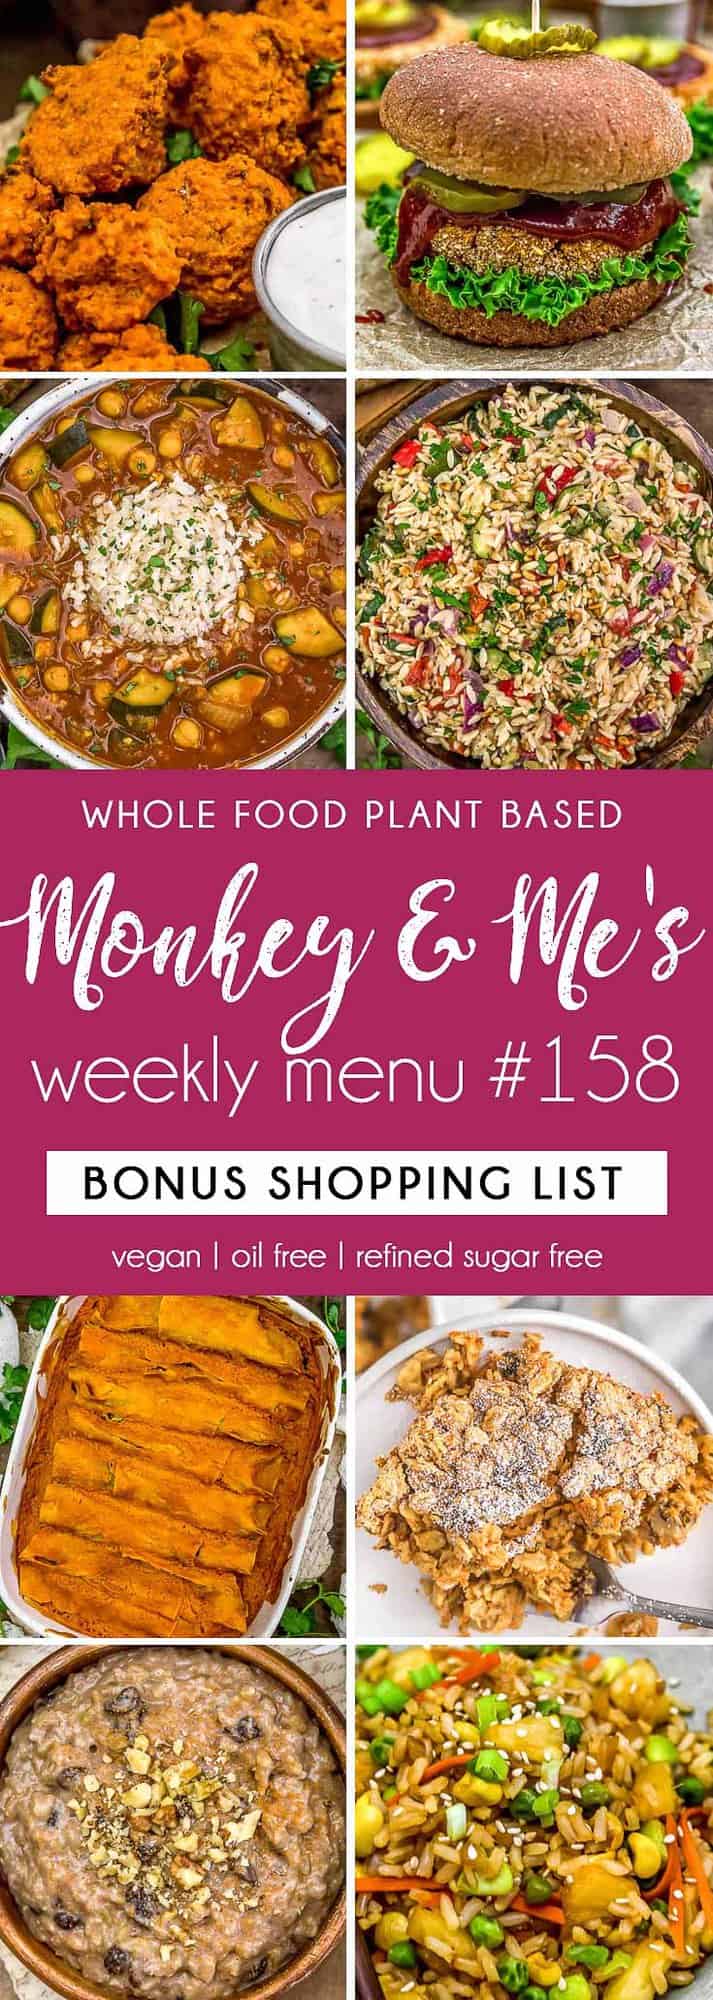 Monkey and Me's Menu 158 featuring 8 recipes